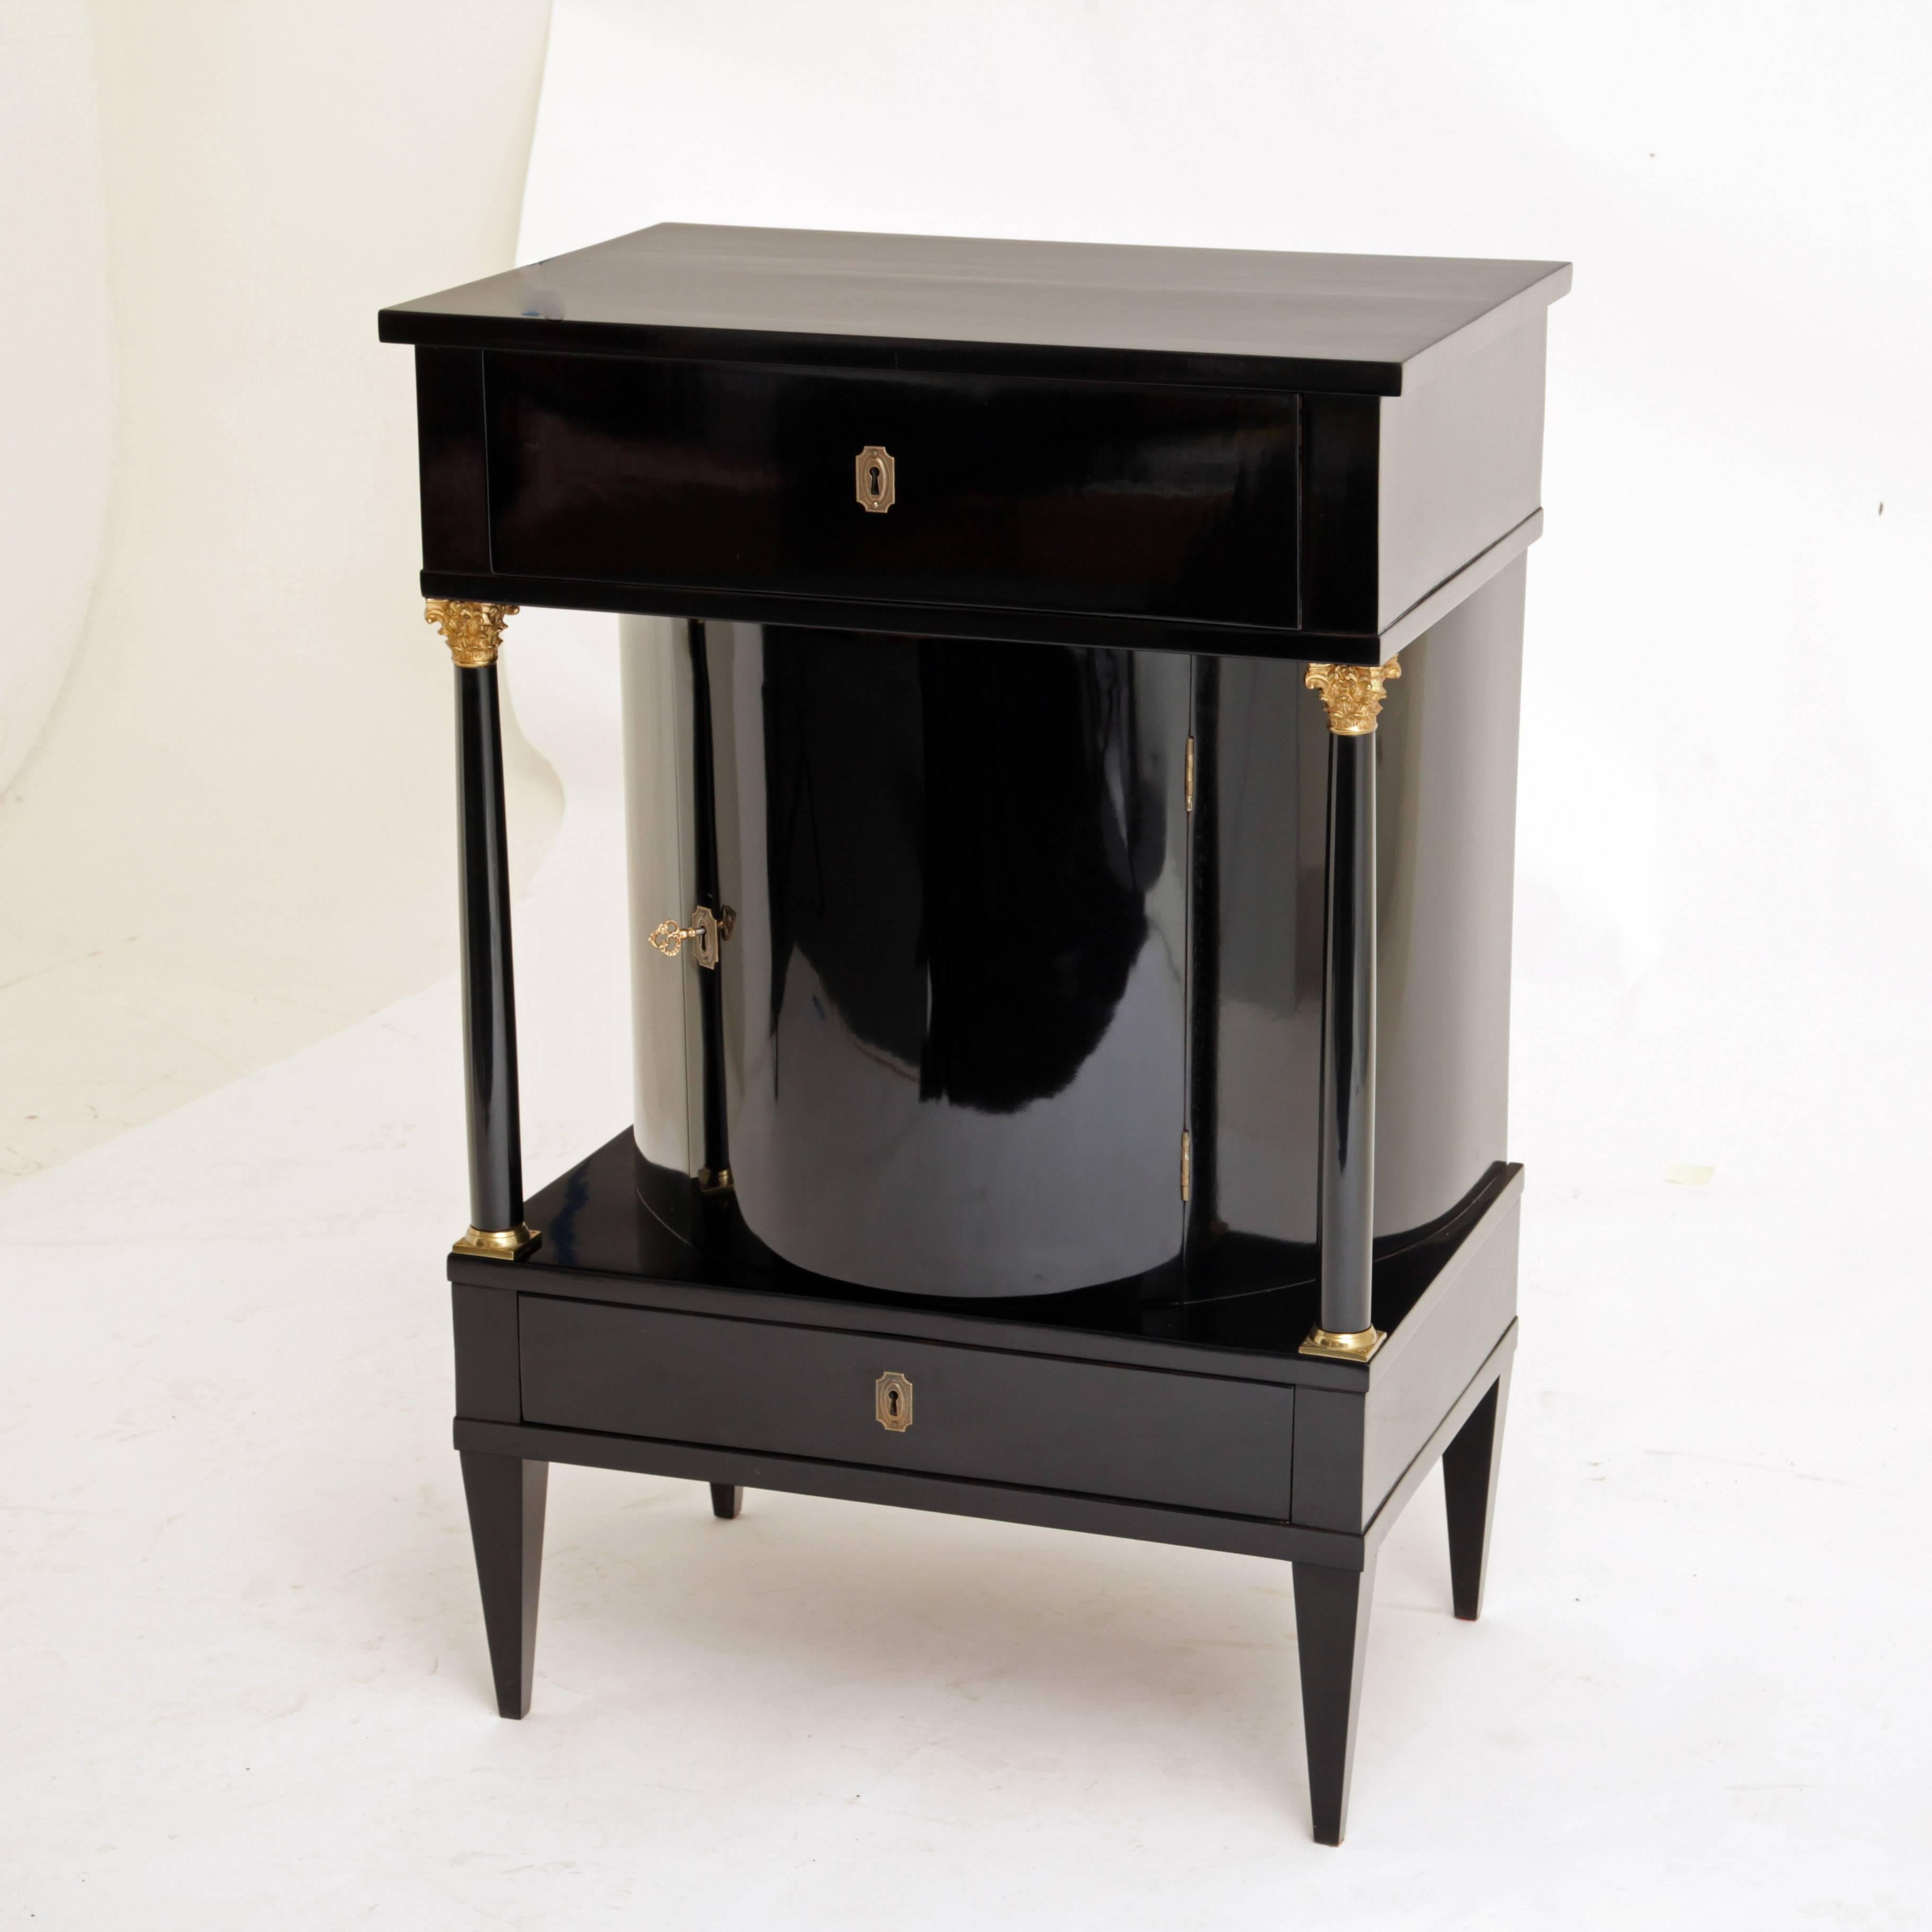 Ebonized cabinet on tapered feet with two drawers and a rounded middle compartment, flanked with columns with gilded capitals and bases. The top drawer has a foldable writing shelf and an extendable lateral compartment. The cabinet is perfectly